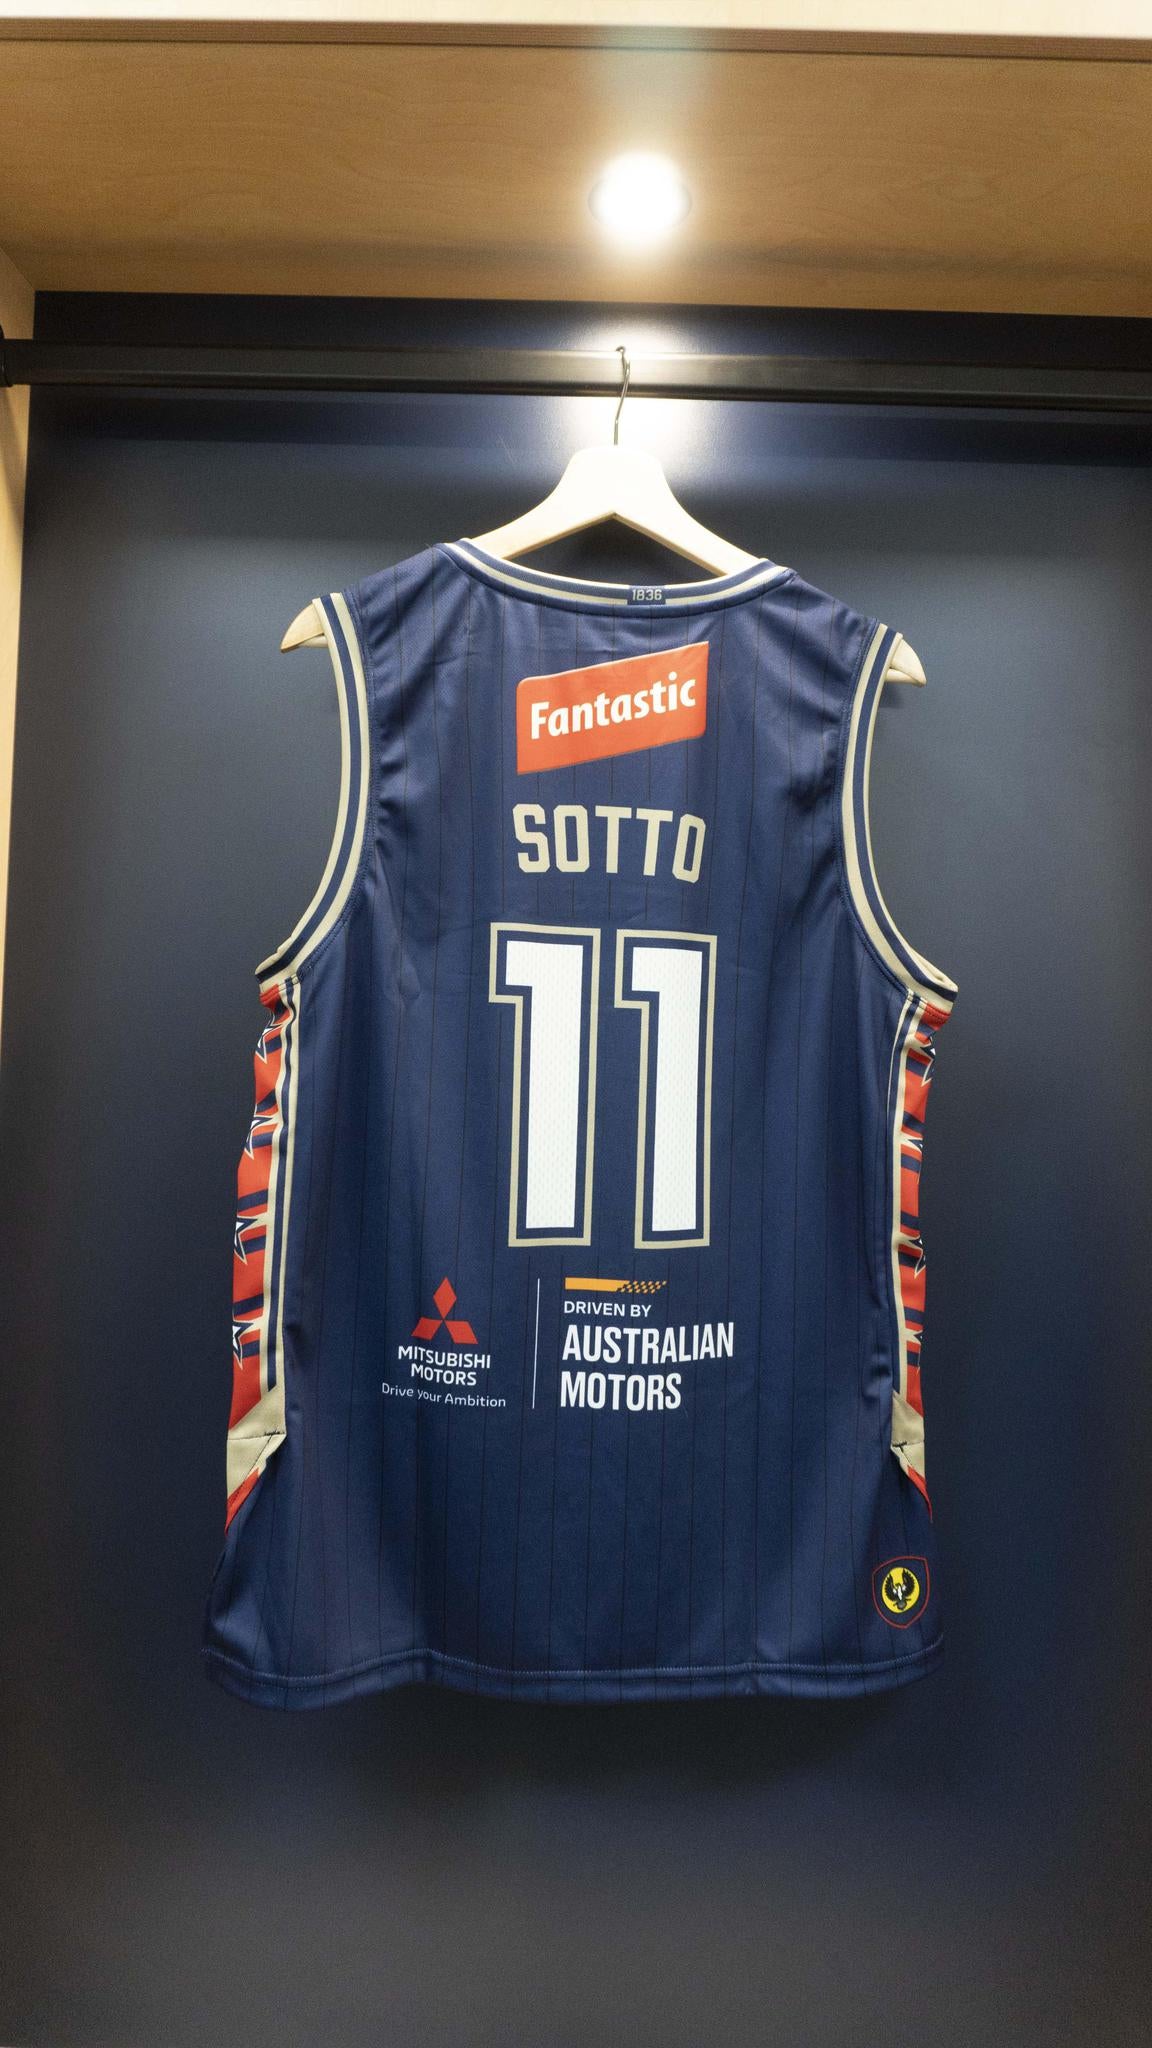 Adelaide 36ers 2021/22 Authentic Adult Home Jersey - Kai Sotto - Adelaide 36ers